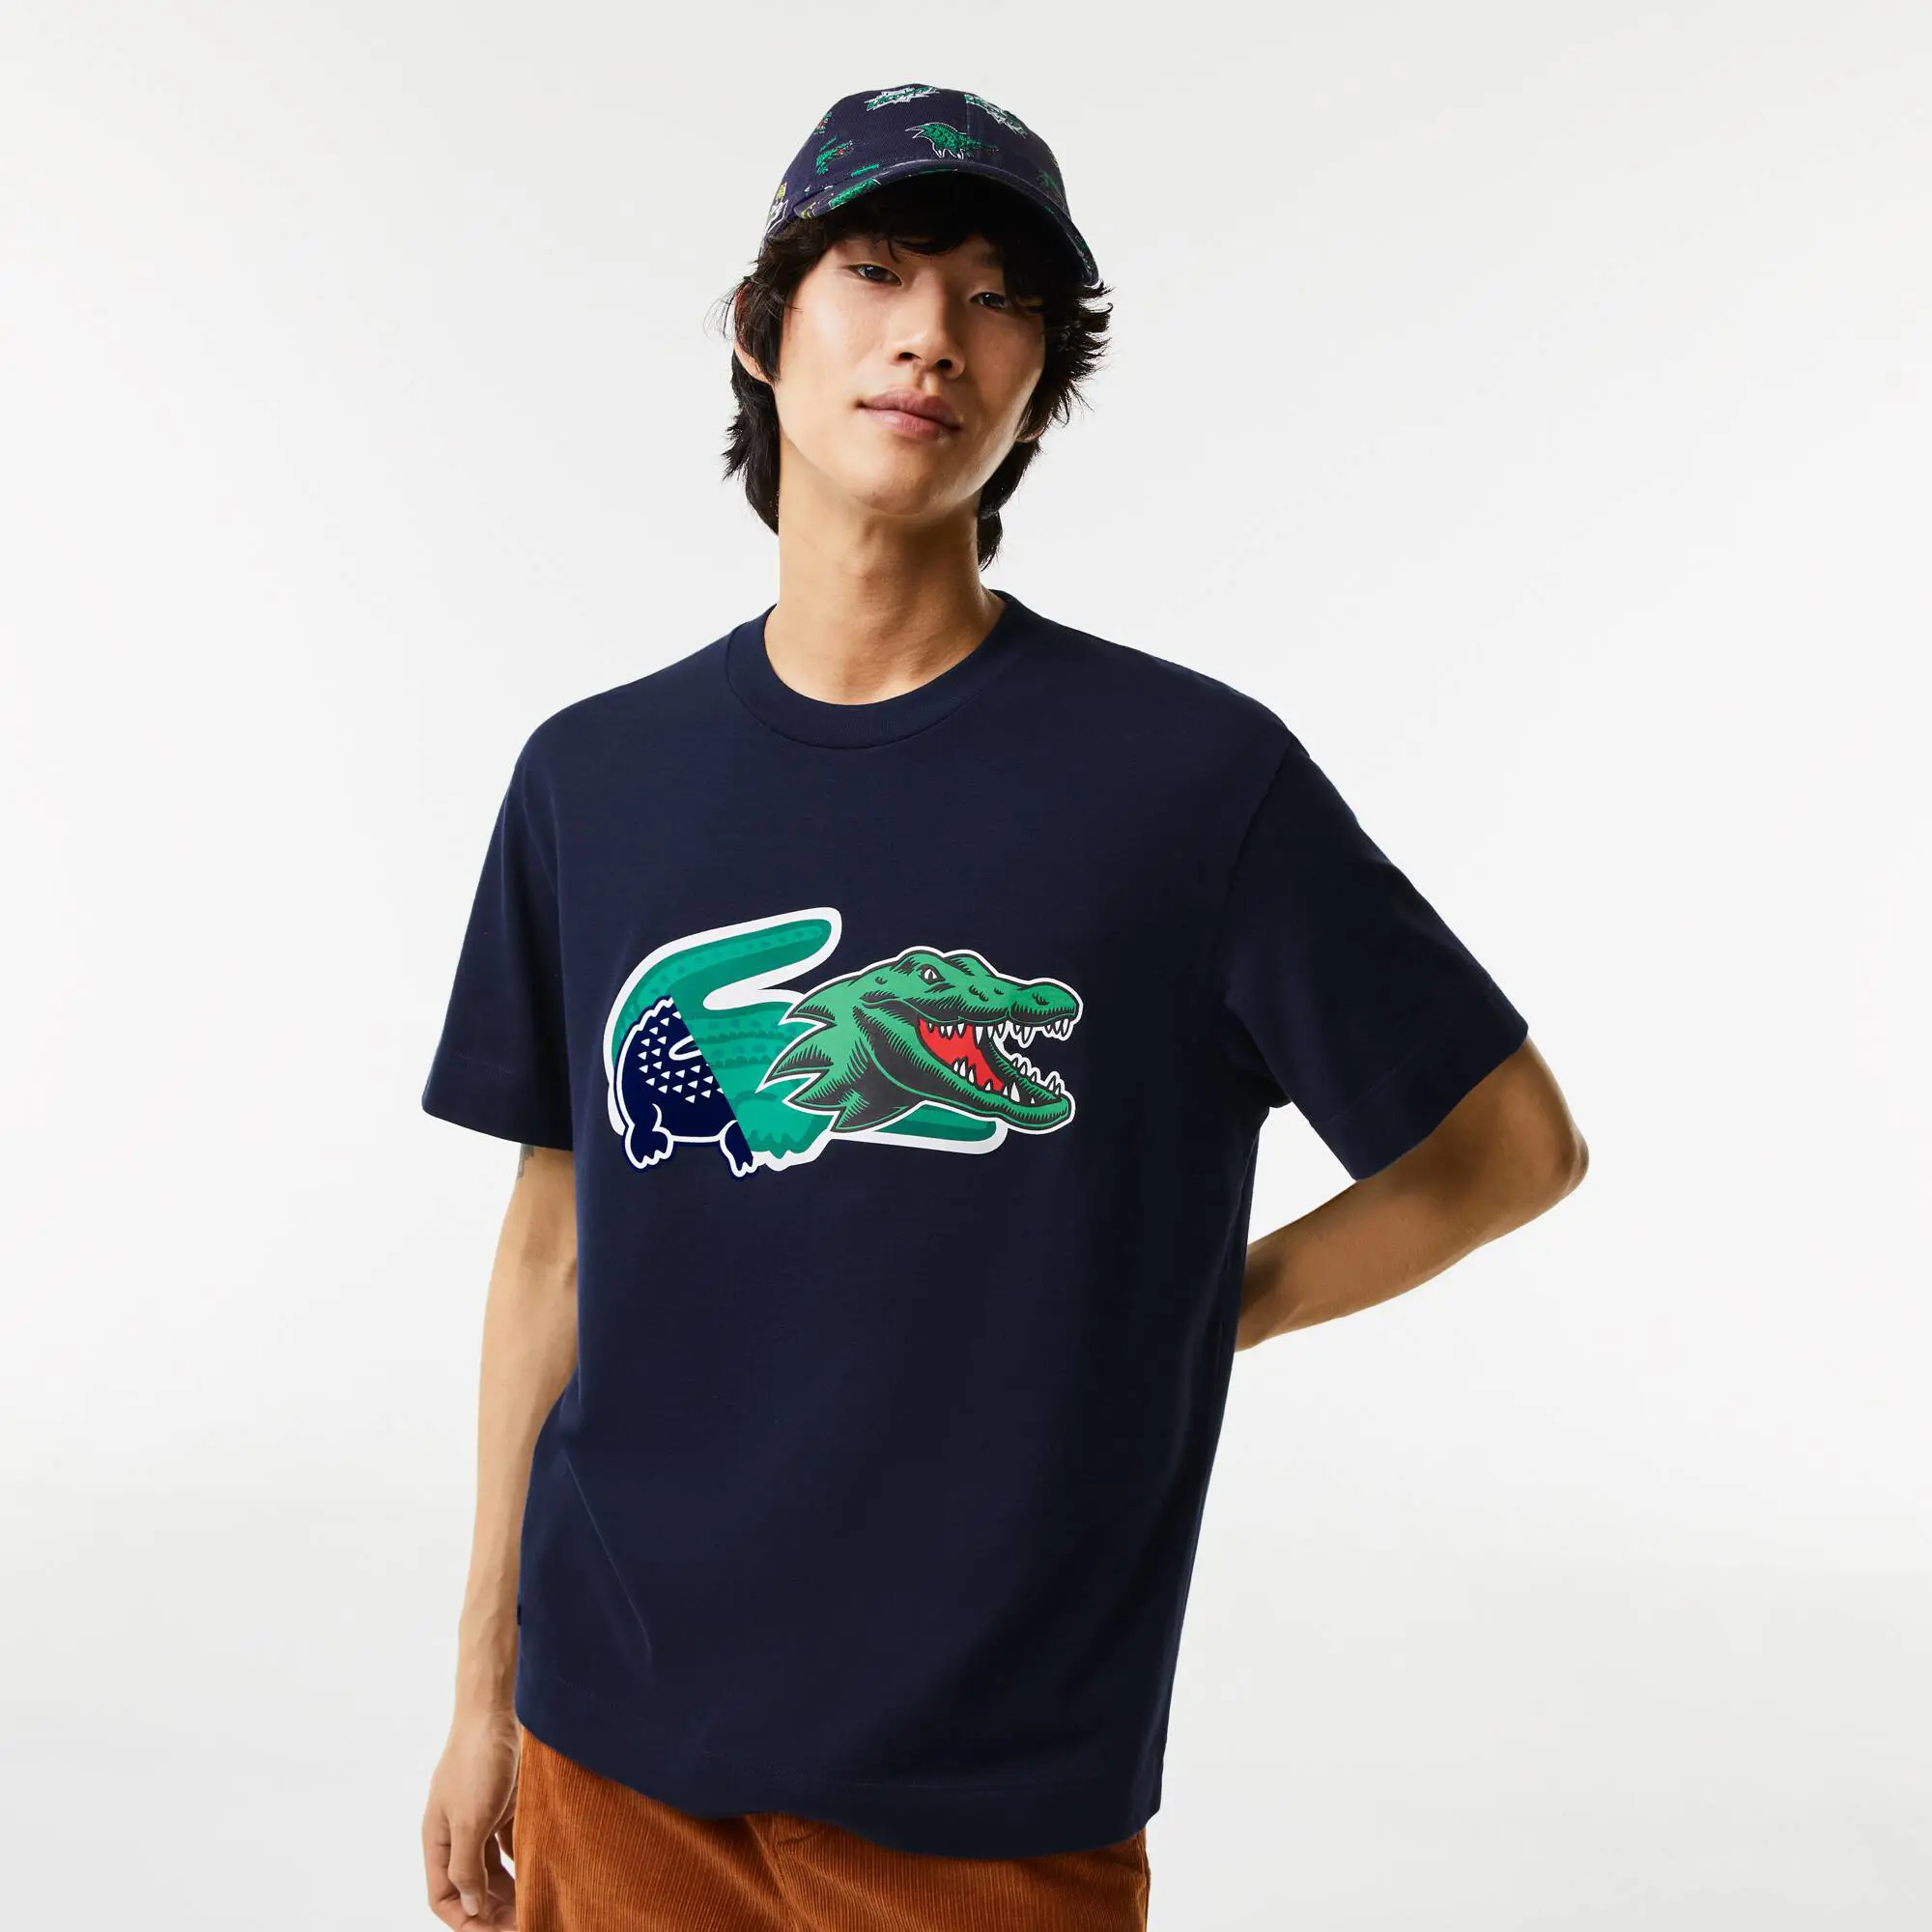 Lacoste Men's Relaxed Fit Oversized Crocodile T-Shirt. 1